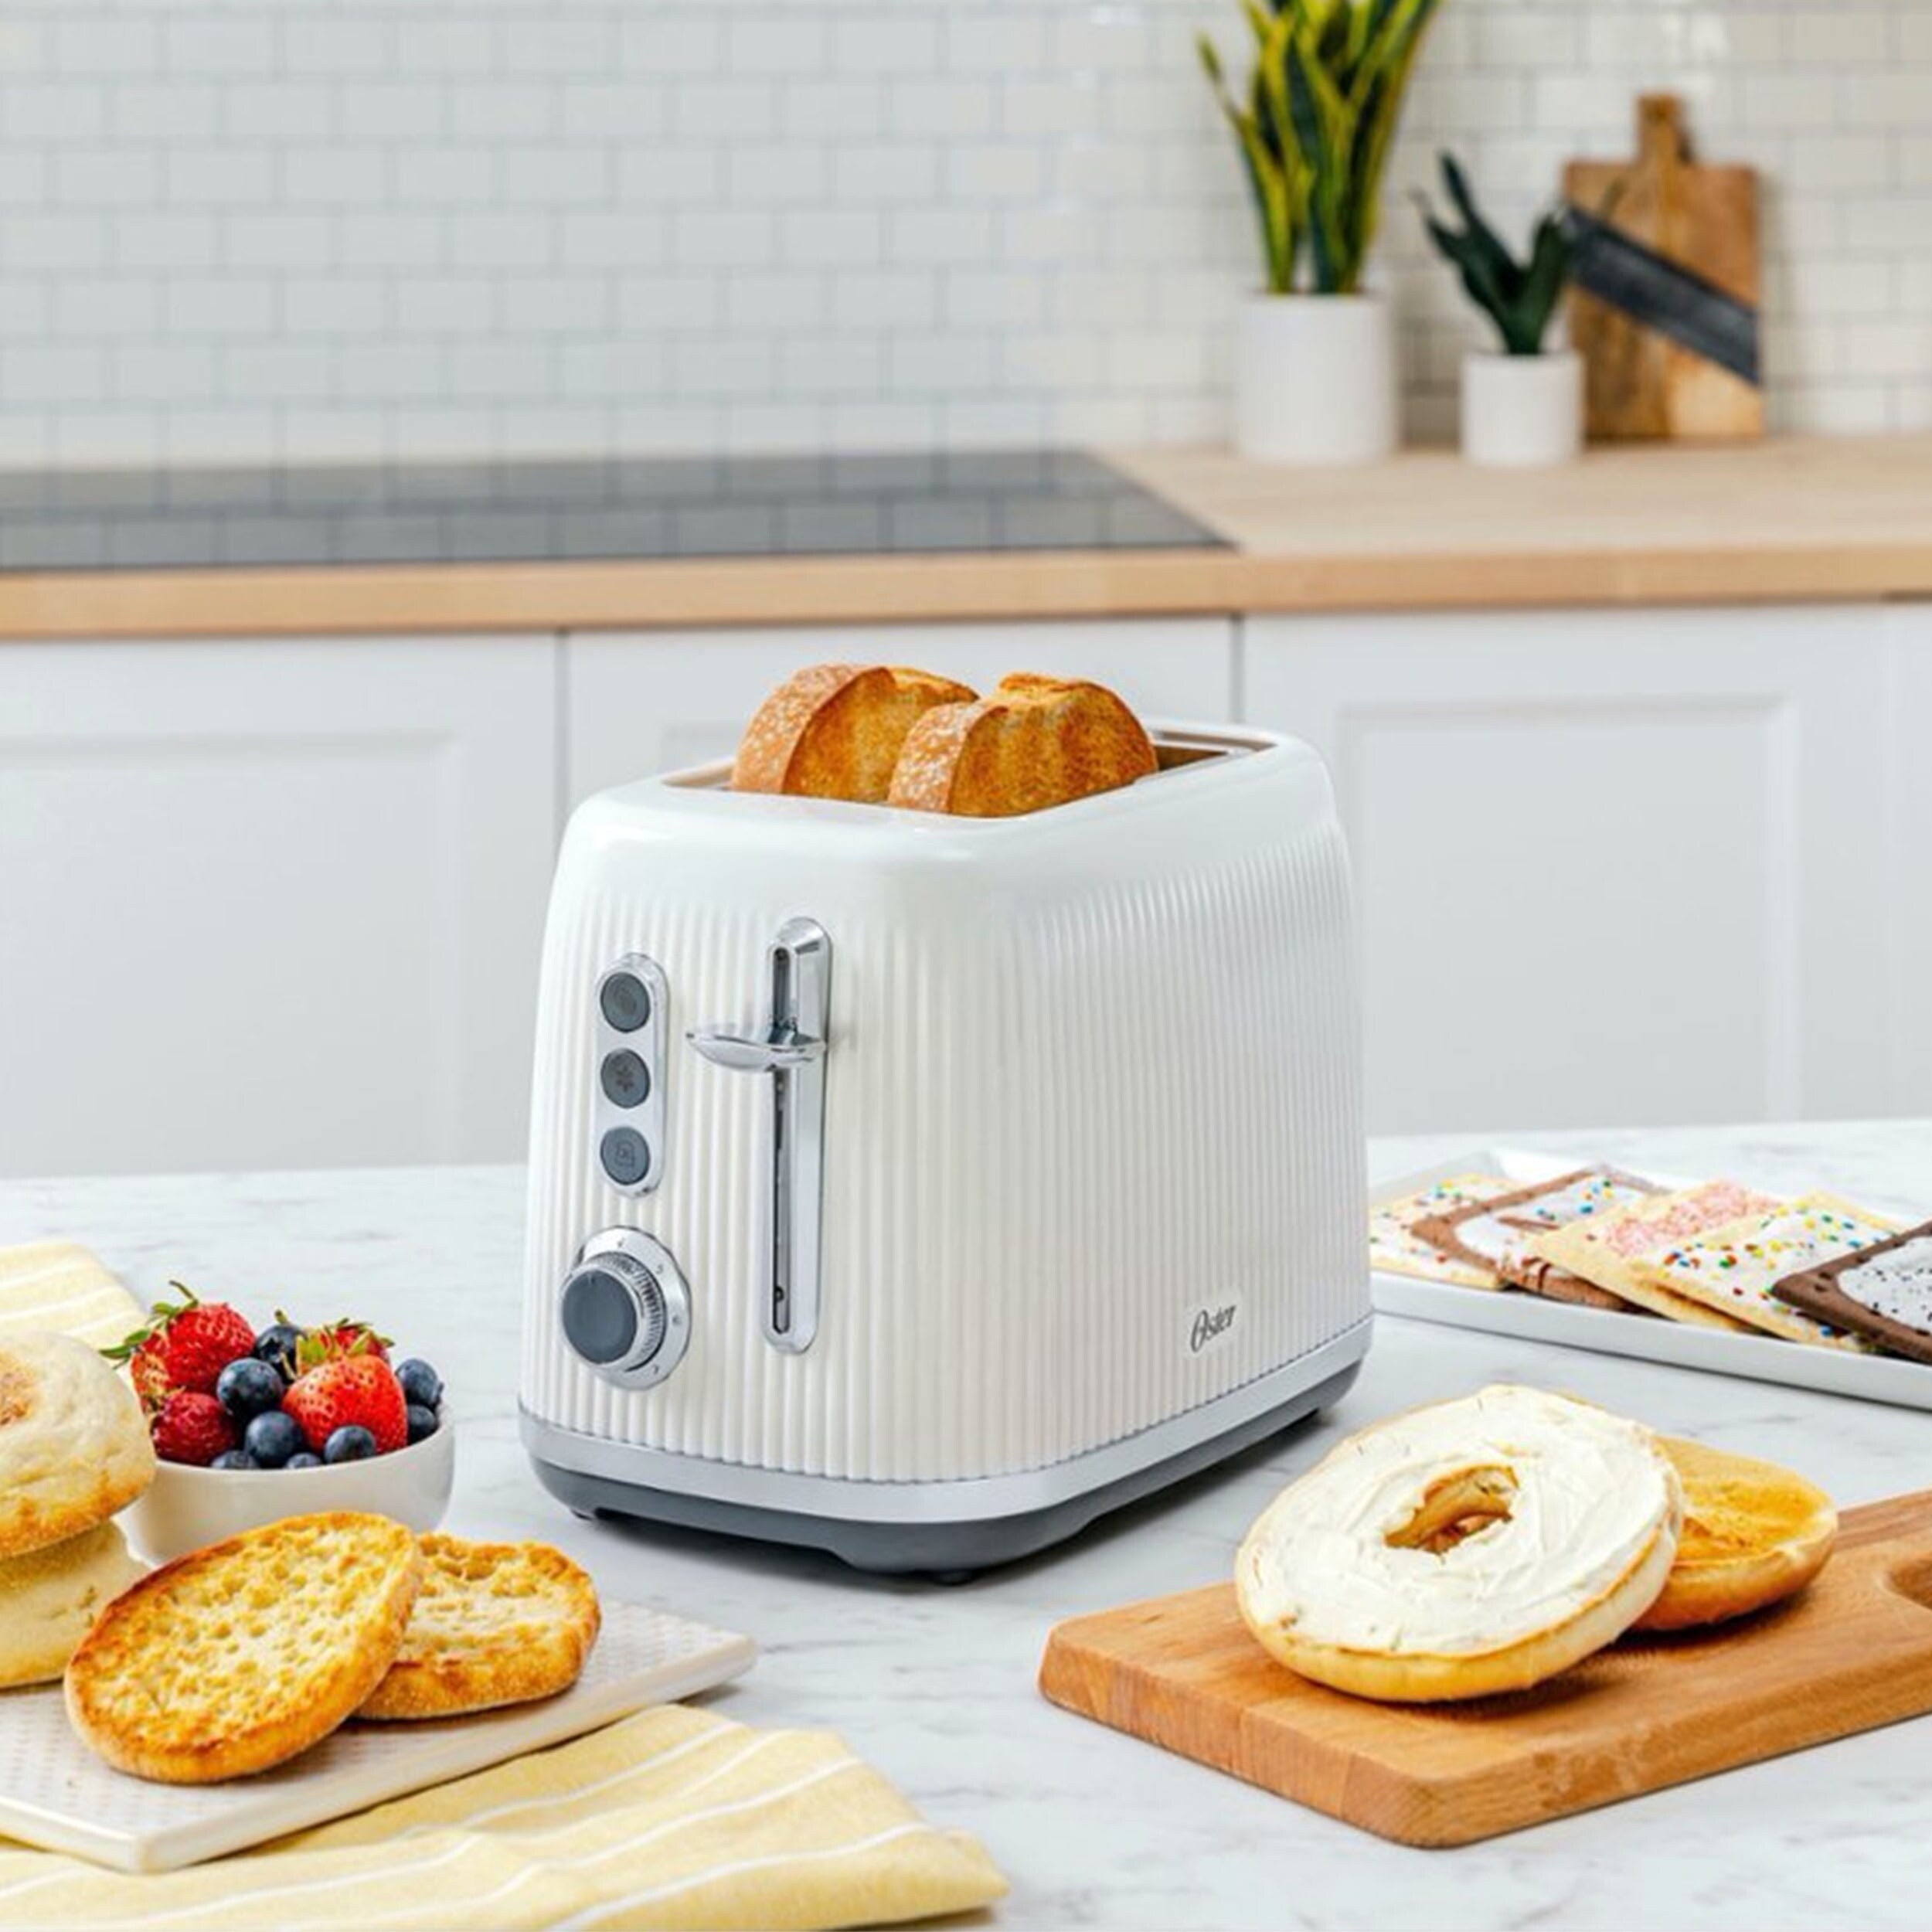 https://ak1.ostkcdn.com/images/products/is/images/direct/a1fc5b9537adcca8a05c94dd7c8c16c9eb6c9a6c/Vintage-Extra-Wide-Slot-2-Slice-Toaster-in-White.jpg